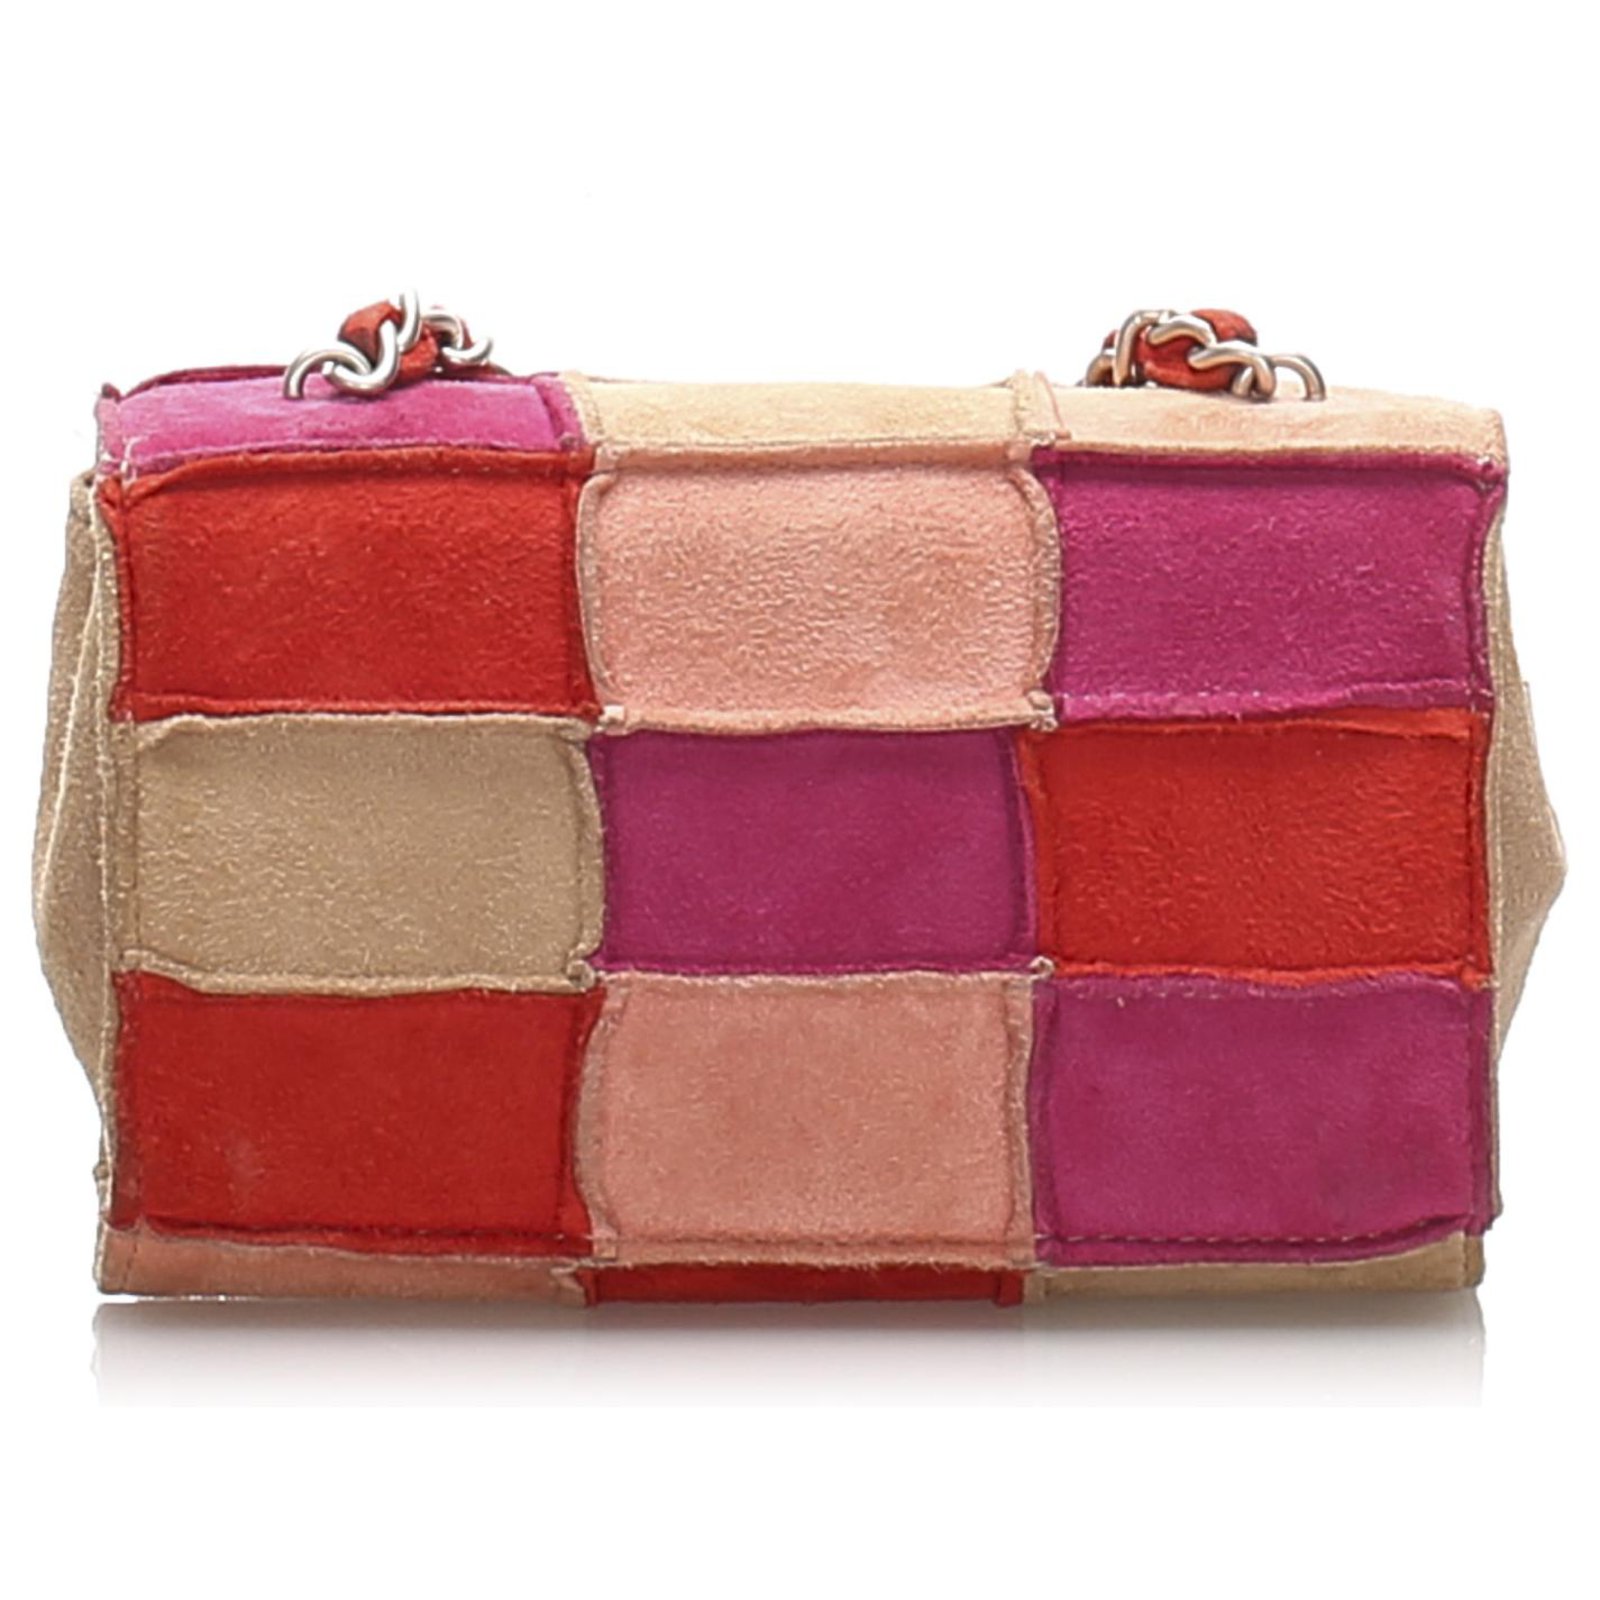 Chanel Pink Choco Bar Patchwork Flap Bag Multiple colors Suede